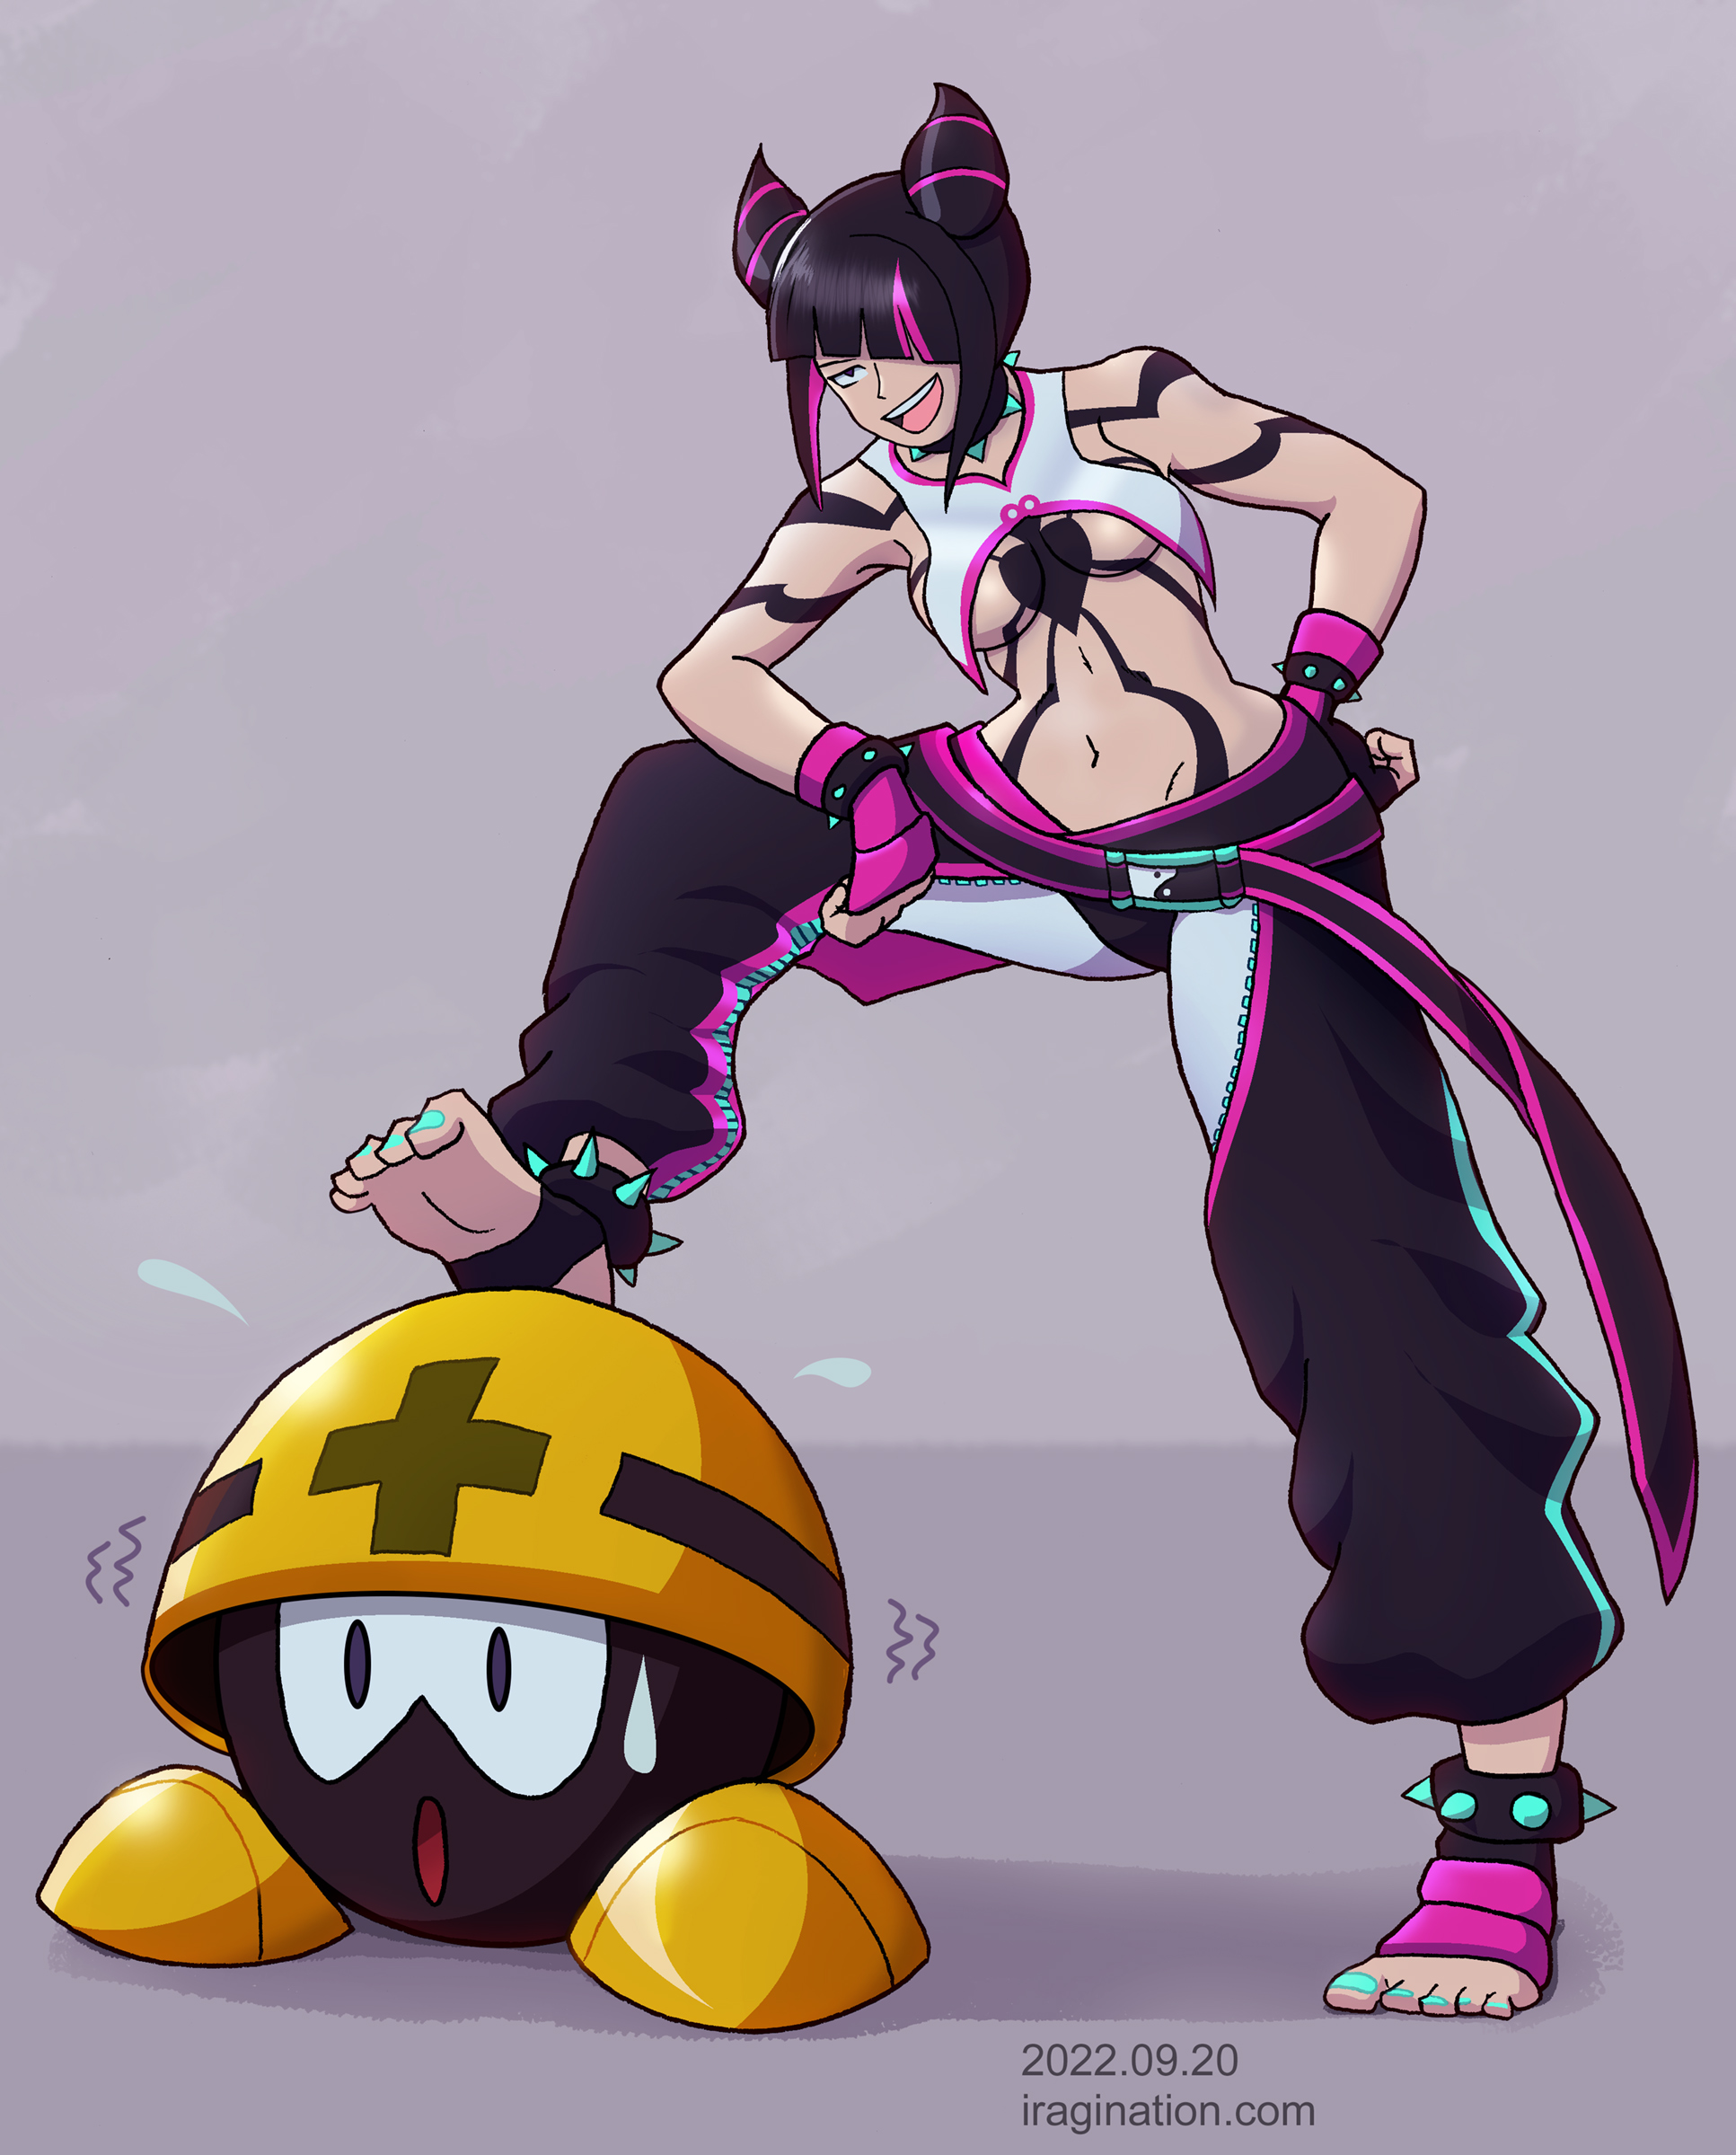 Juri and Met
[url=https://streetfighter.fandom.com/wiki/Juri_Han]Juri Han[/url] is a character from the [b]Street Fighter[/b] series.

This illustration is based on the [url=https://youtu.be/O1BdLImCsWQ]Street Fighter 6 - Extreme Battle[/url] promotional video released last week. Halfway through the video, you’ll see a [b]Met[/b] that appears to be caught in the middle of a battle. For some reason, he’s huge. It seems to be a fun obstacle mode, so don’t read too much into it.

This was going to be a quick sketch. I started it late during the weekend but it did not seem too much trouble to color it, so I took the extra time to do it.

Street Fighter 6 © CAPCOM
Keywords: juri-han met